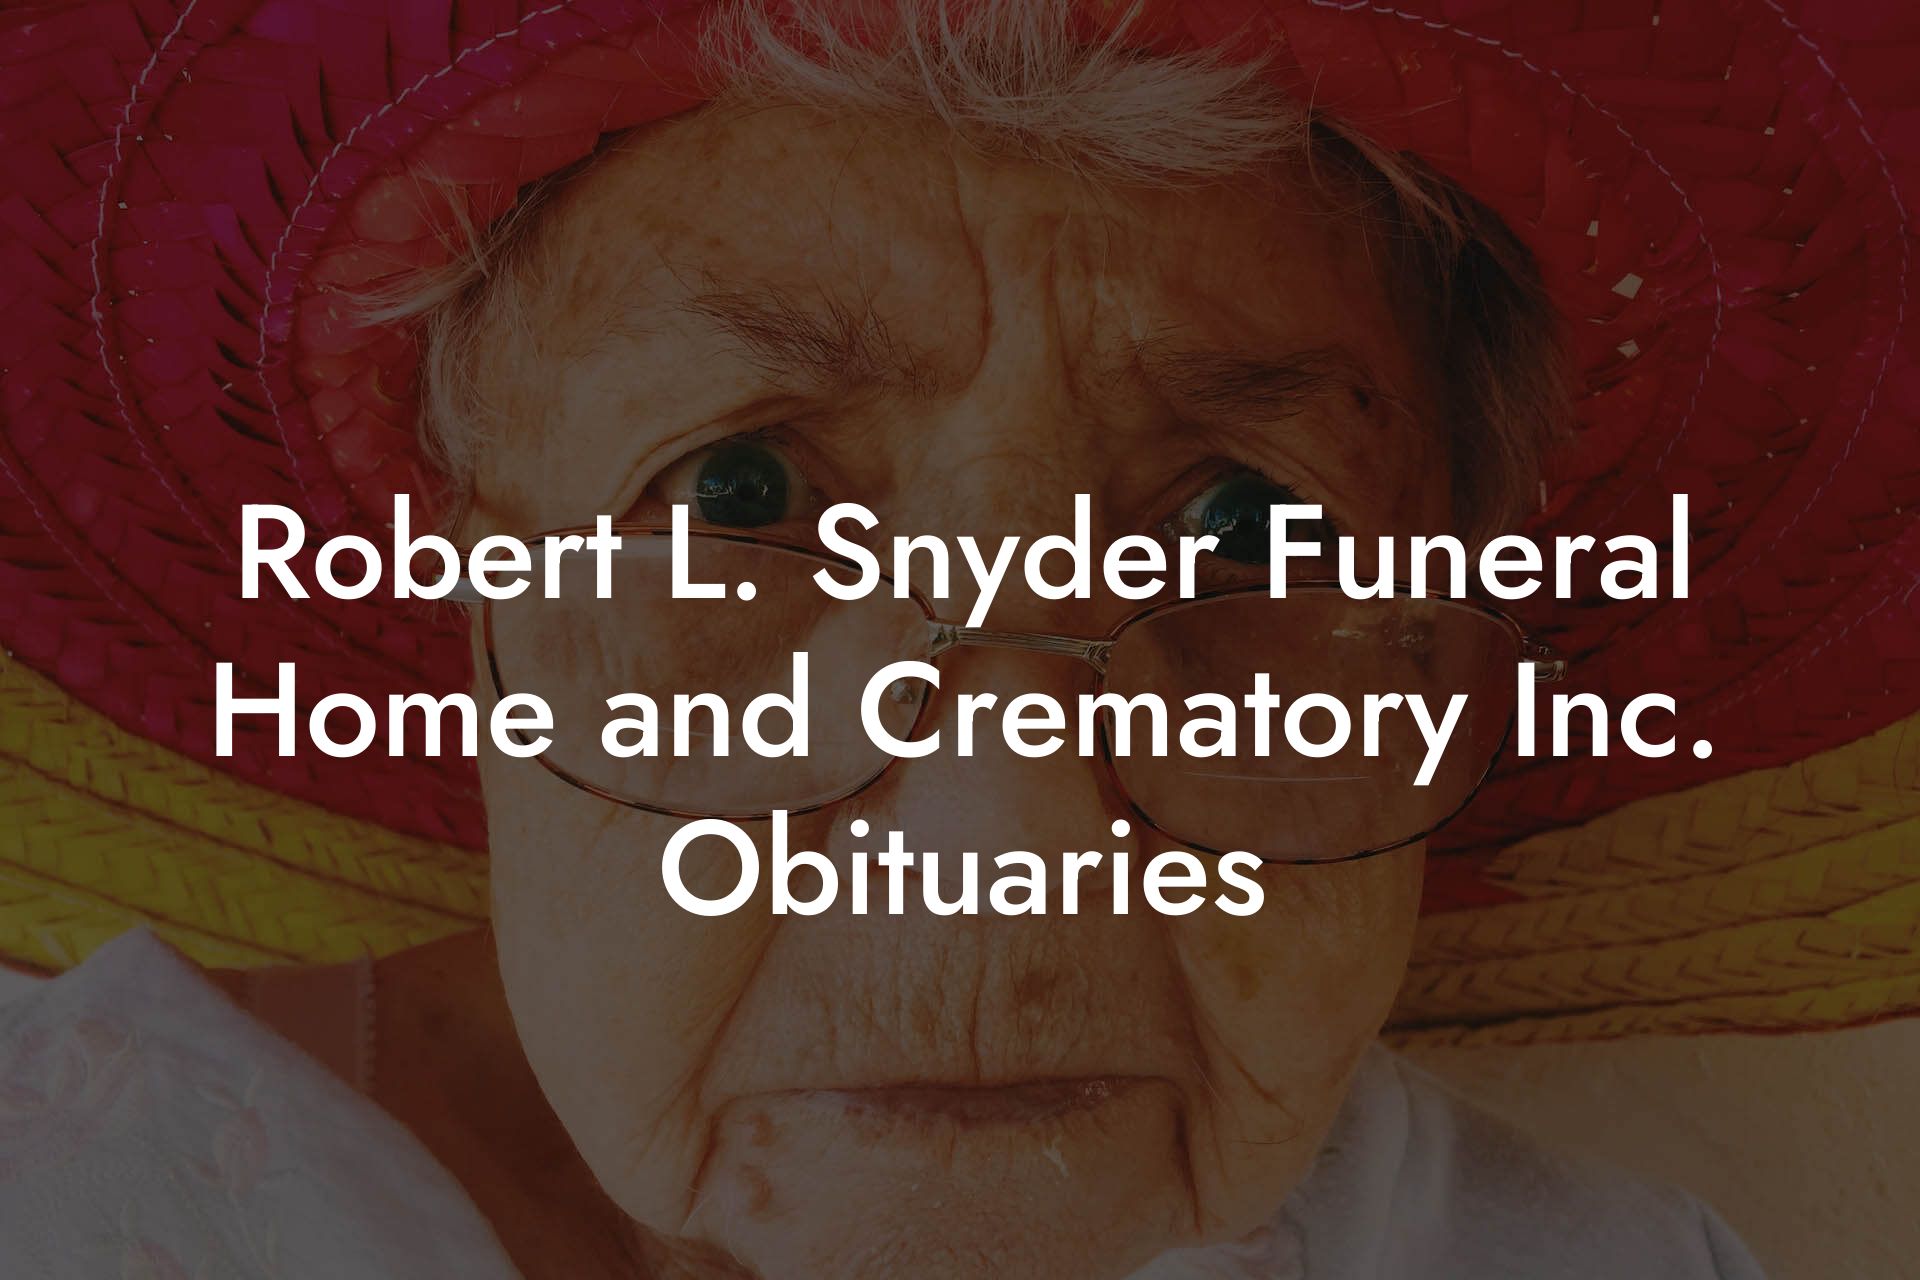 Robert L. Snyder Funeral Home and Crematory Inc. Obituaries